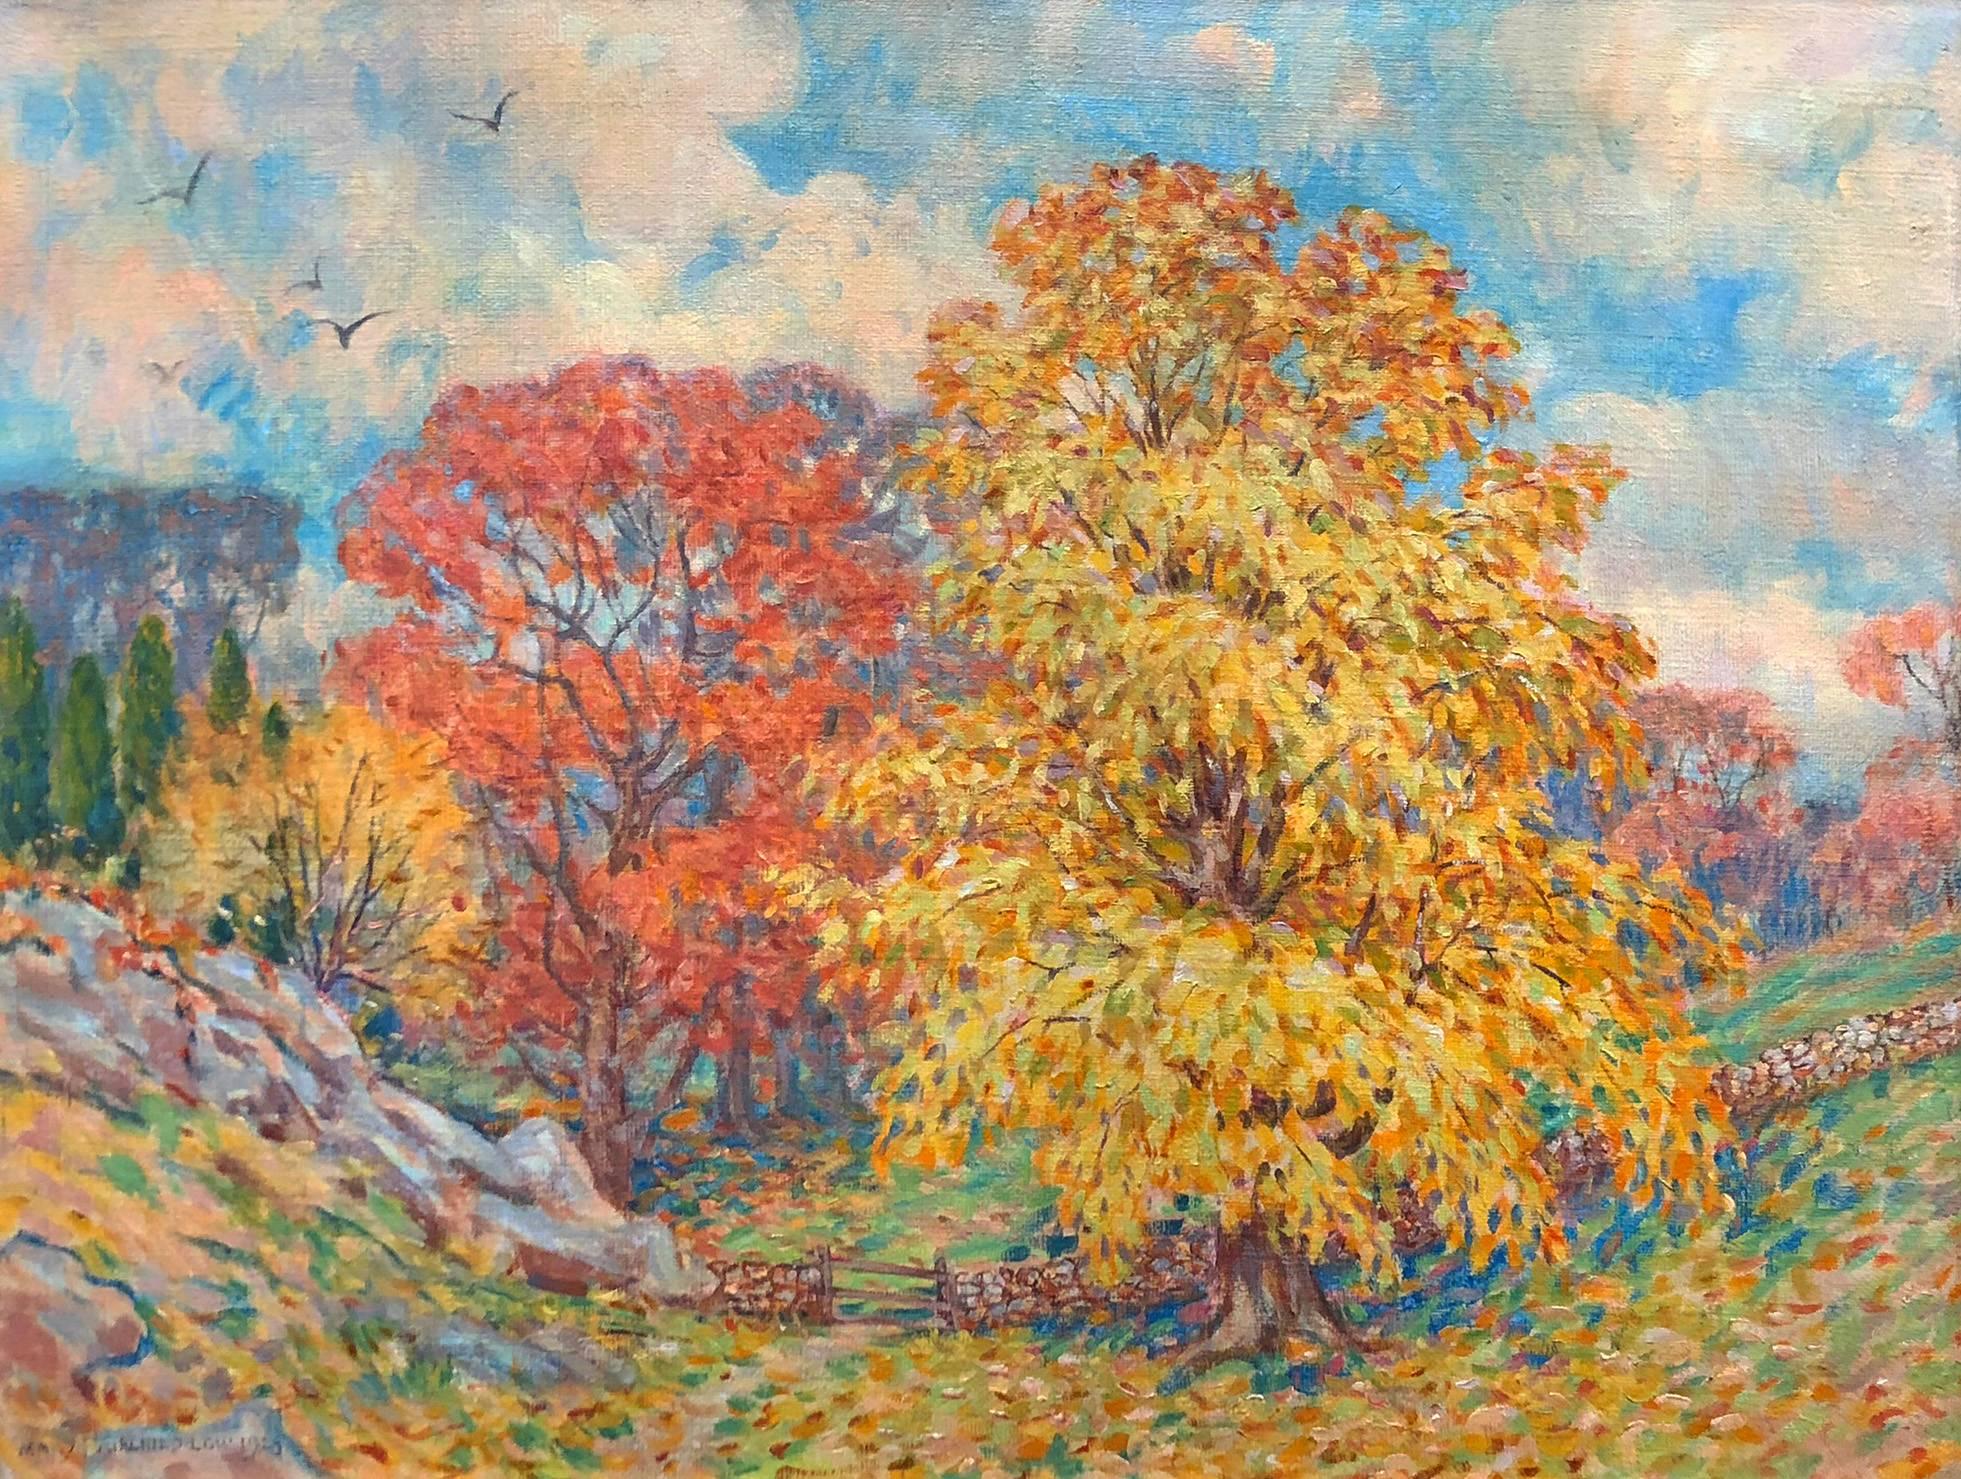 Golden Autumn, Greenwich Connecticut - Painting by Mary Louise (Low) Fairchild 